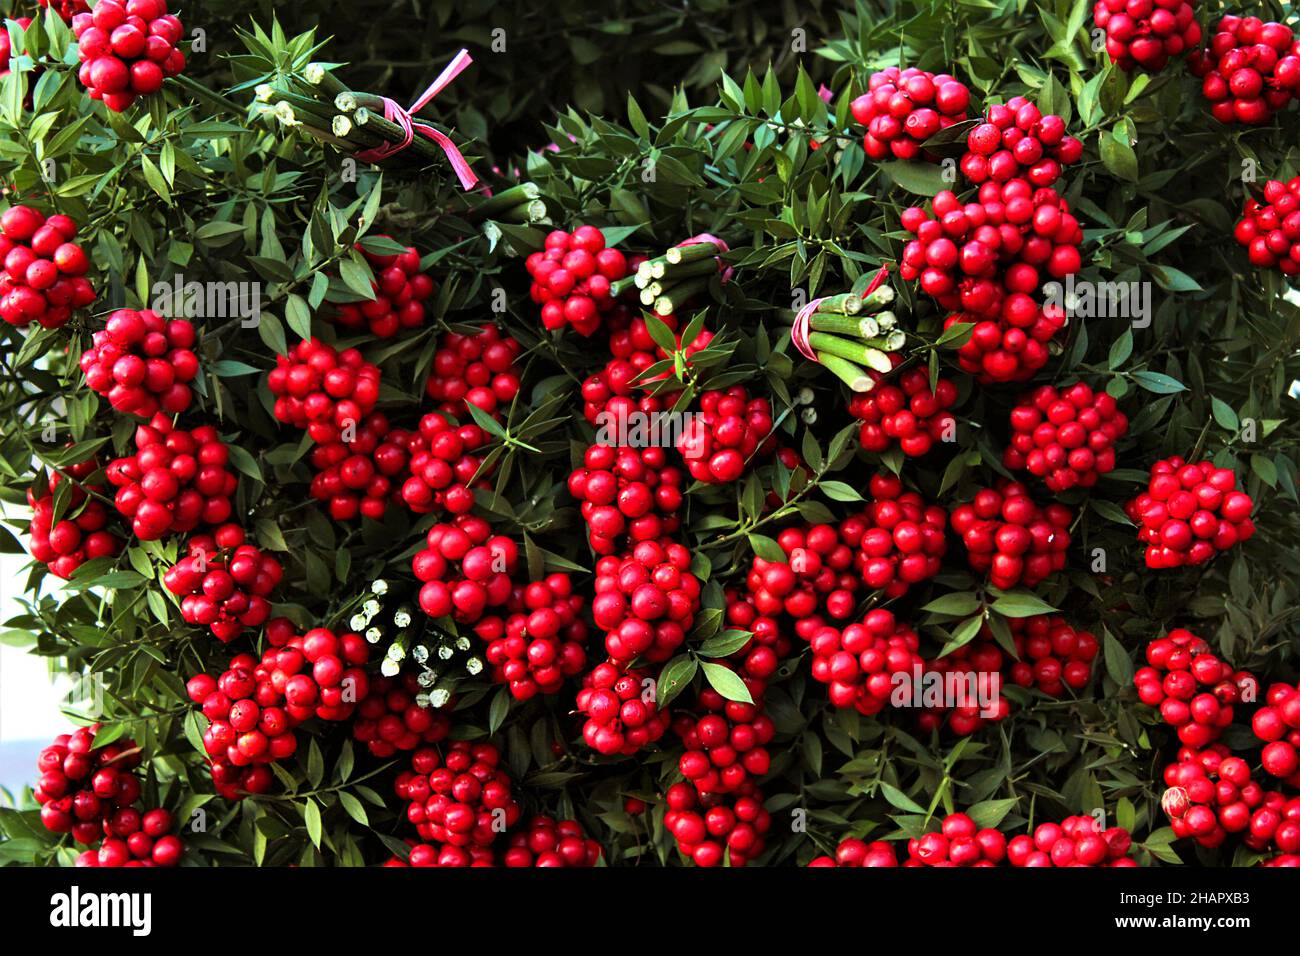 Kokina,Butcher's broom is old an Istanbul tradition when christmas comes.Combination red flowers bouquets piling at flower seller.Backgrounds Stock Photo